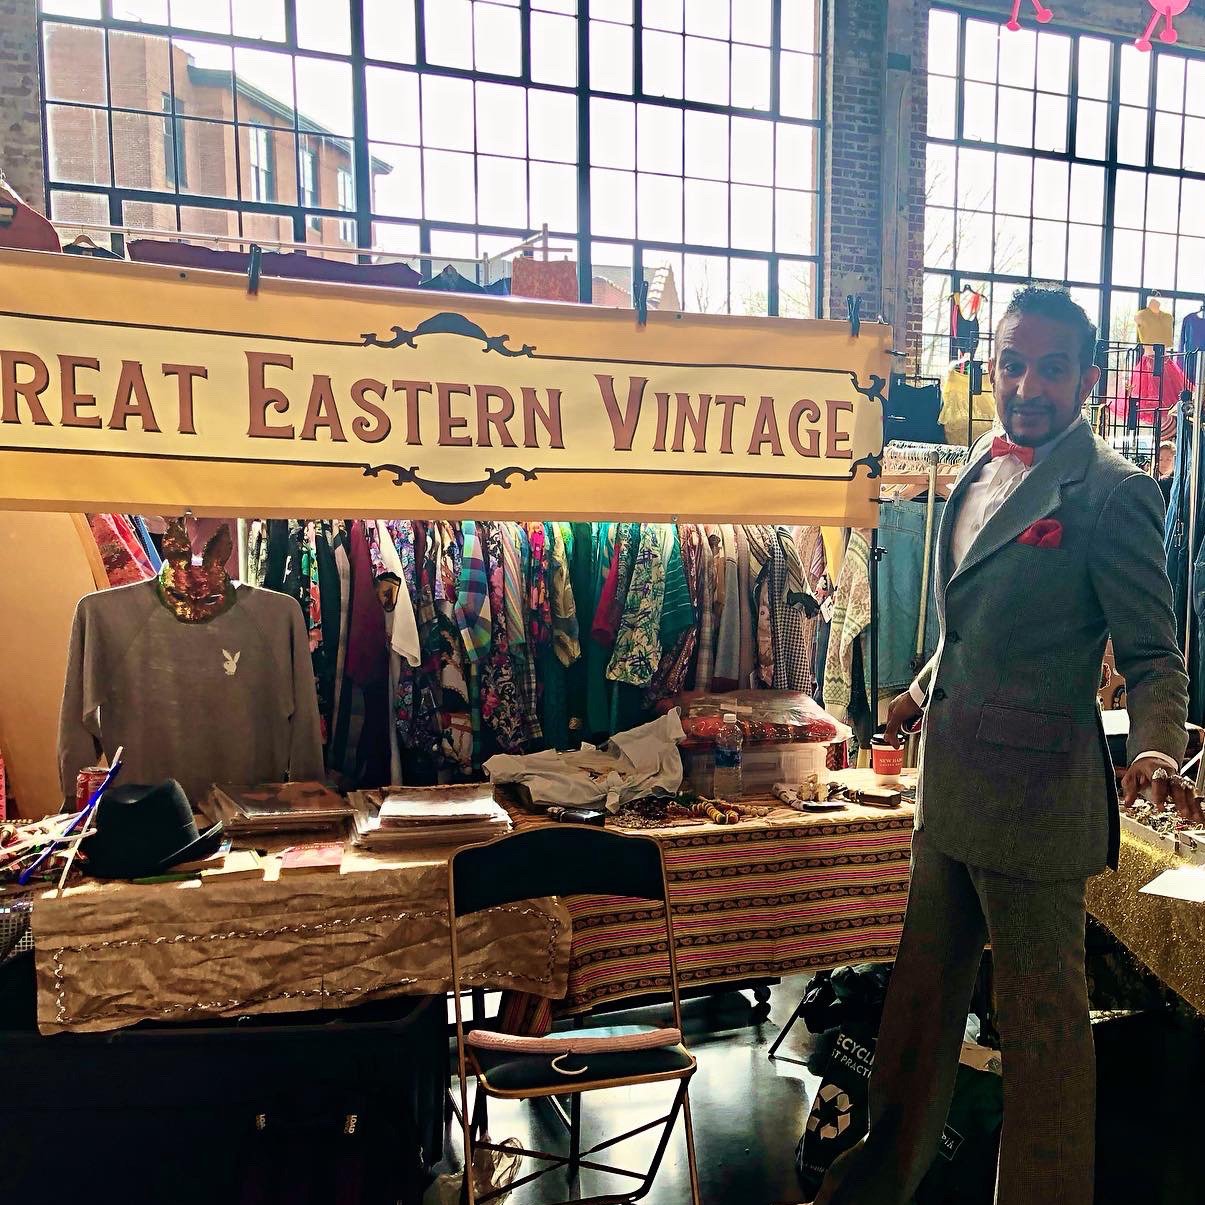 GREAT EASTERN TRADING CO